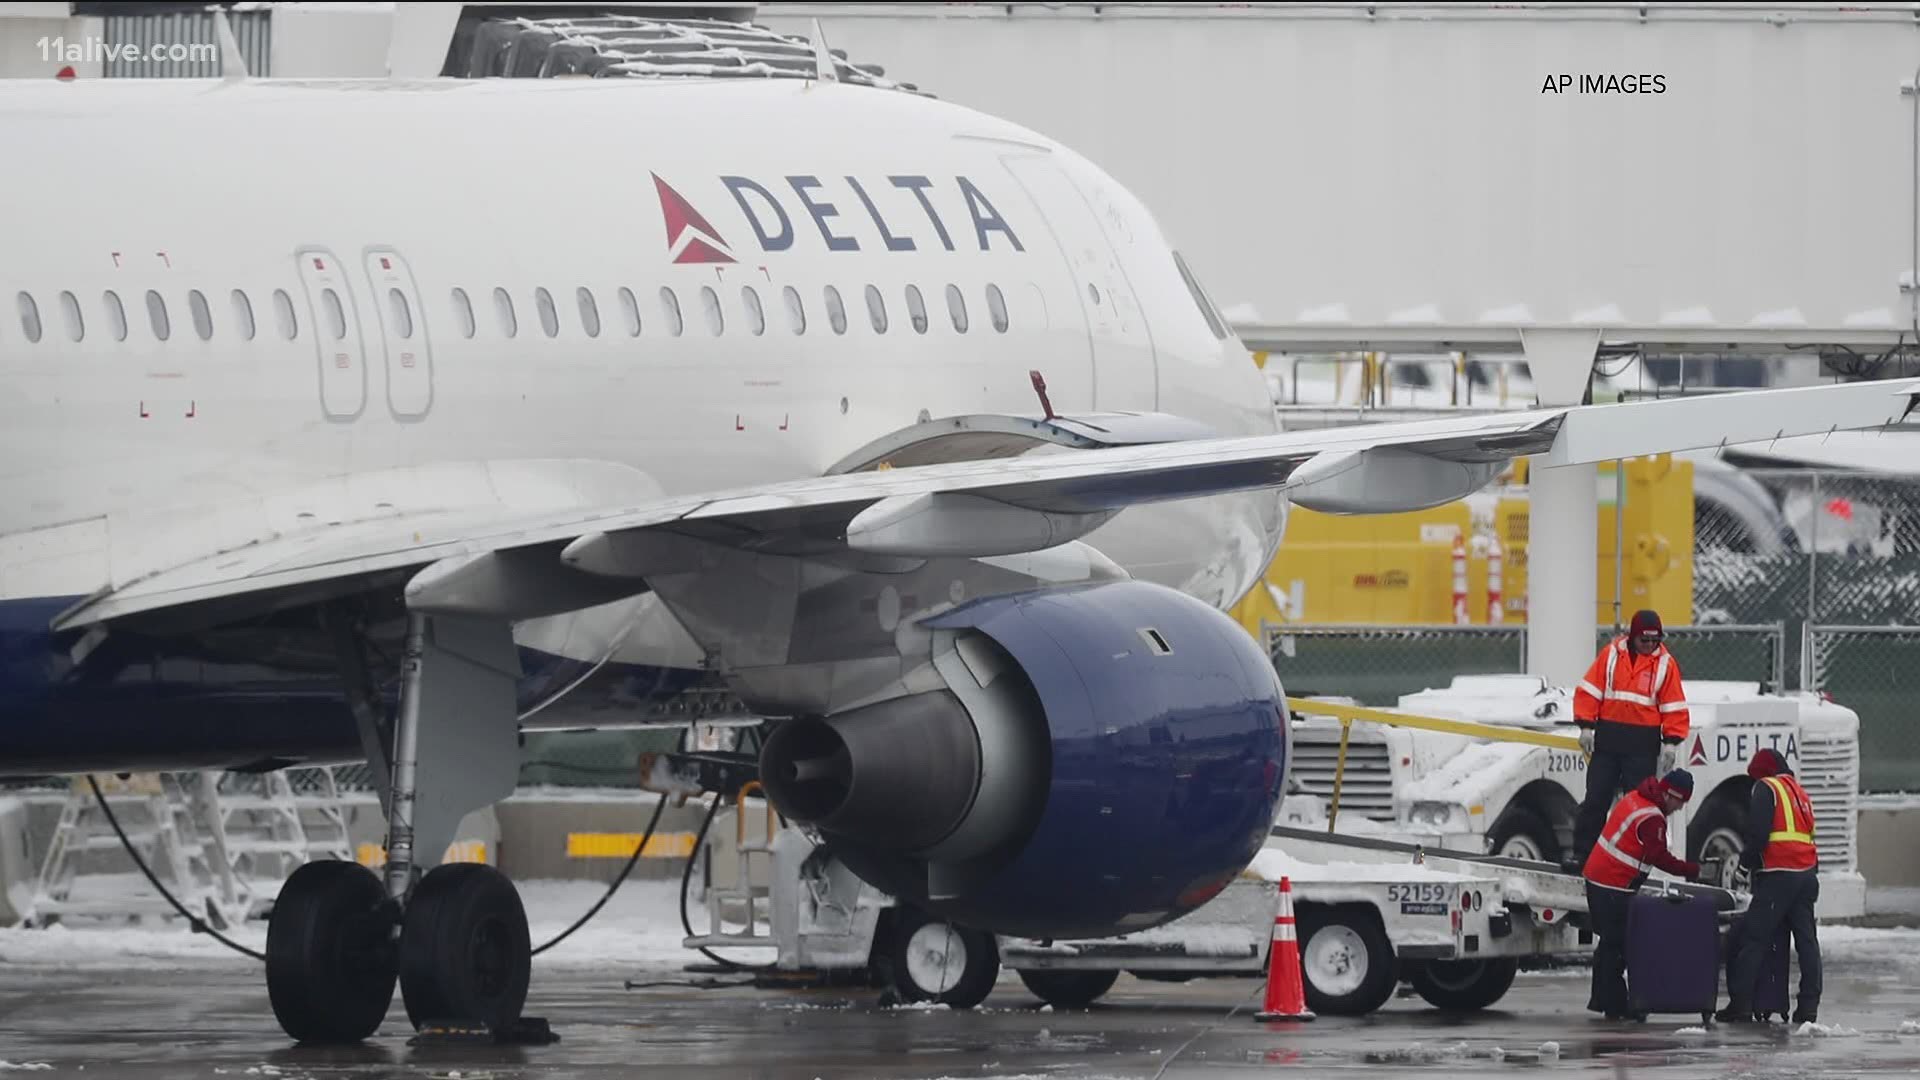 "A list of banned customers doesn’t work as well if that customer can fly with another airline," Kristen Manion Taylor with Delta Air Lines wrote.